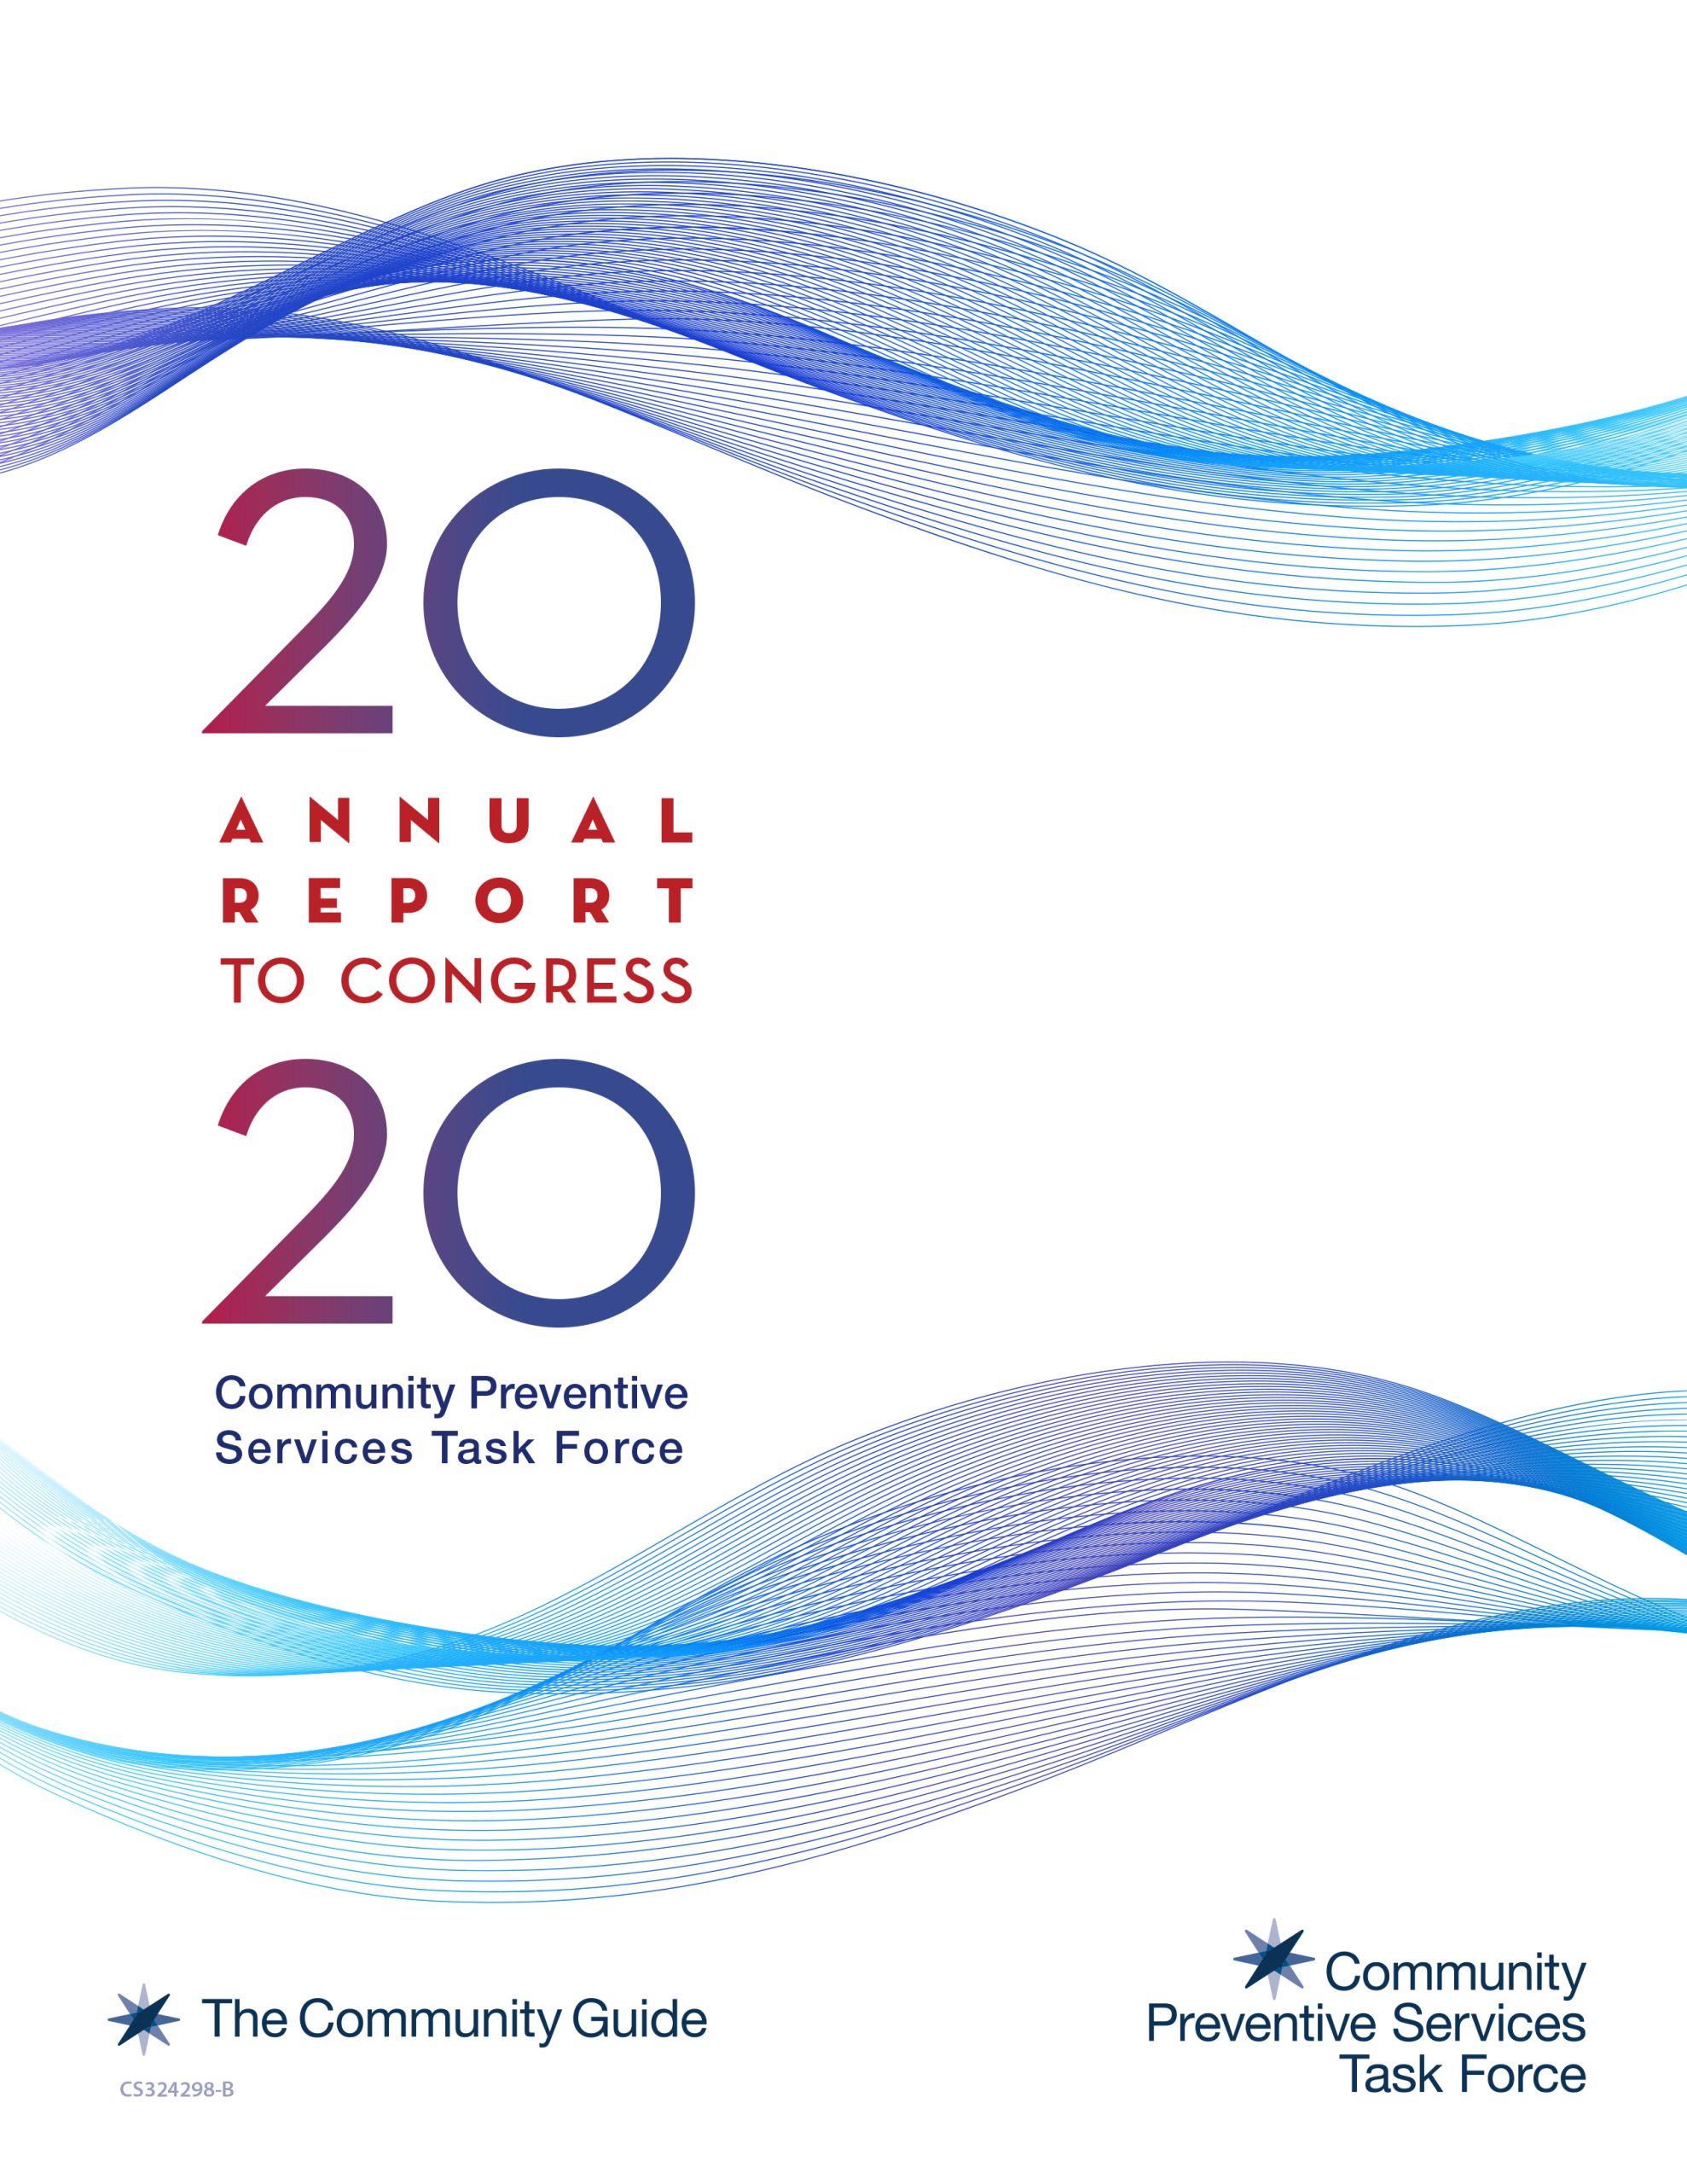 The cover of the 2020 CPSTF Annual Report to Congress